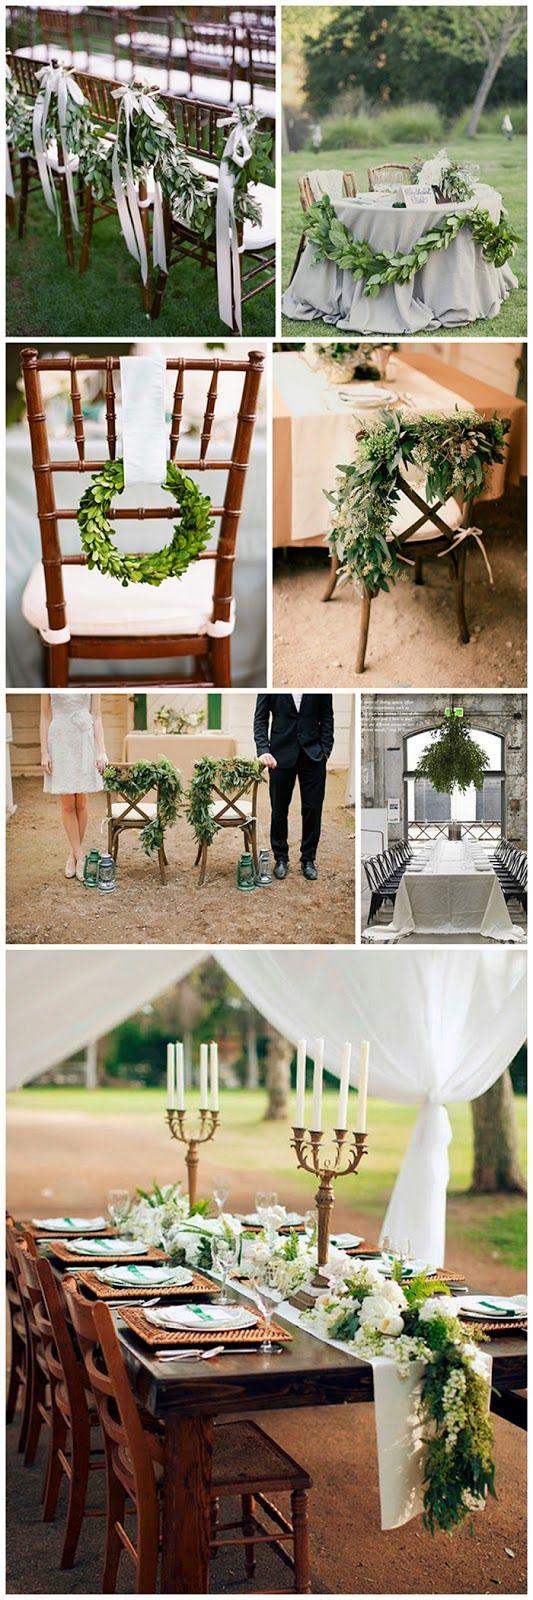 Wedding - {It's In The Details} Inspired By Gorgeous Greenery In Wedding Details